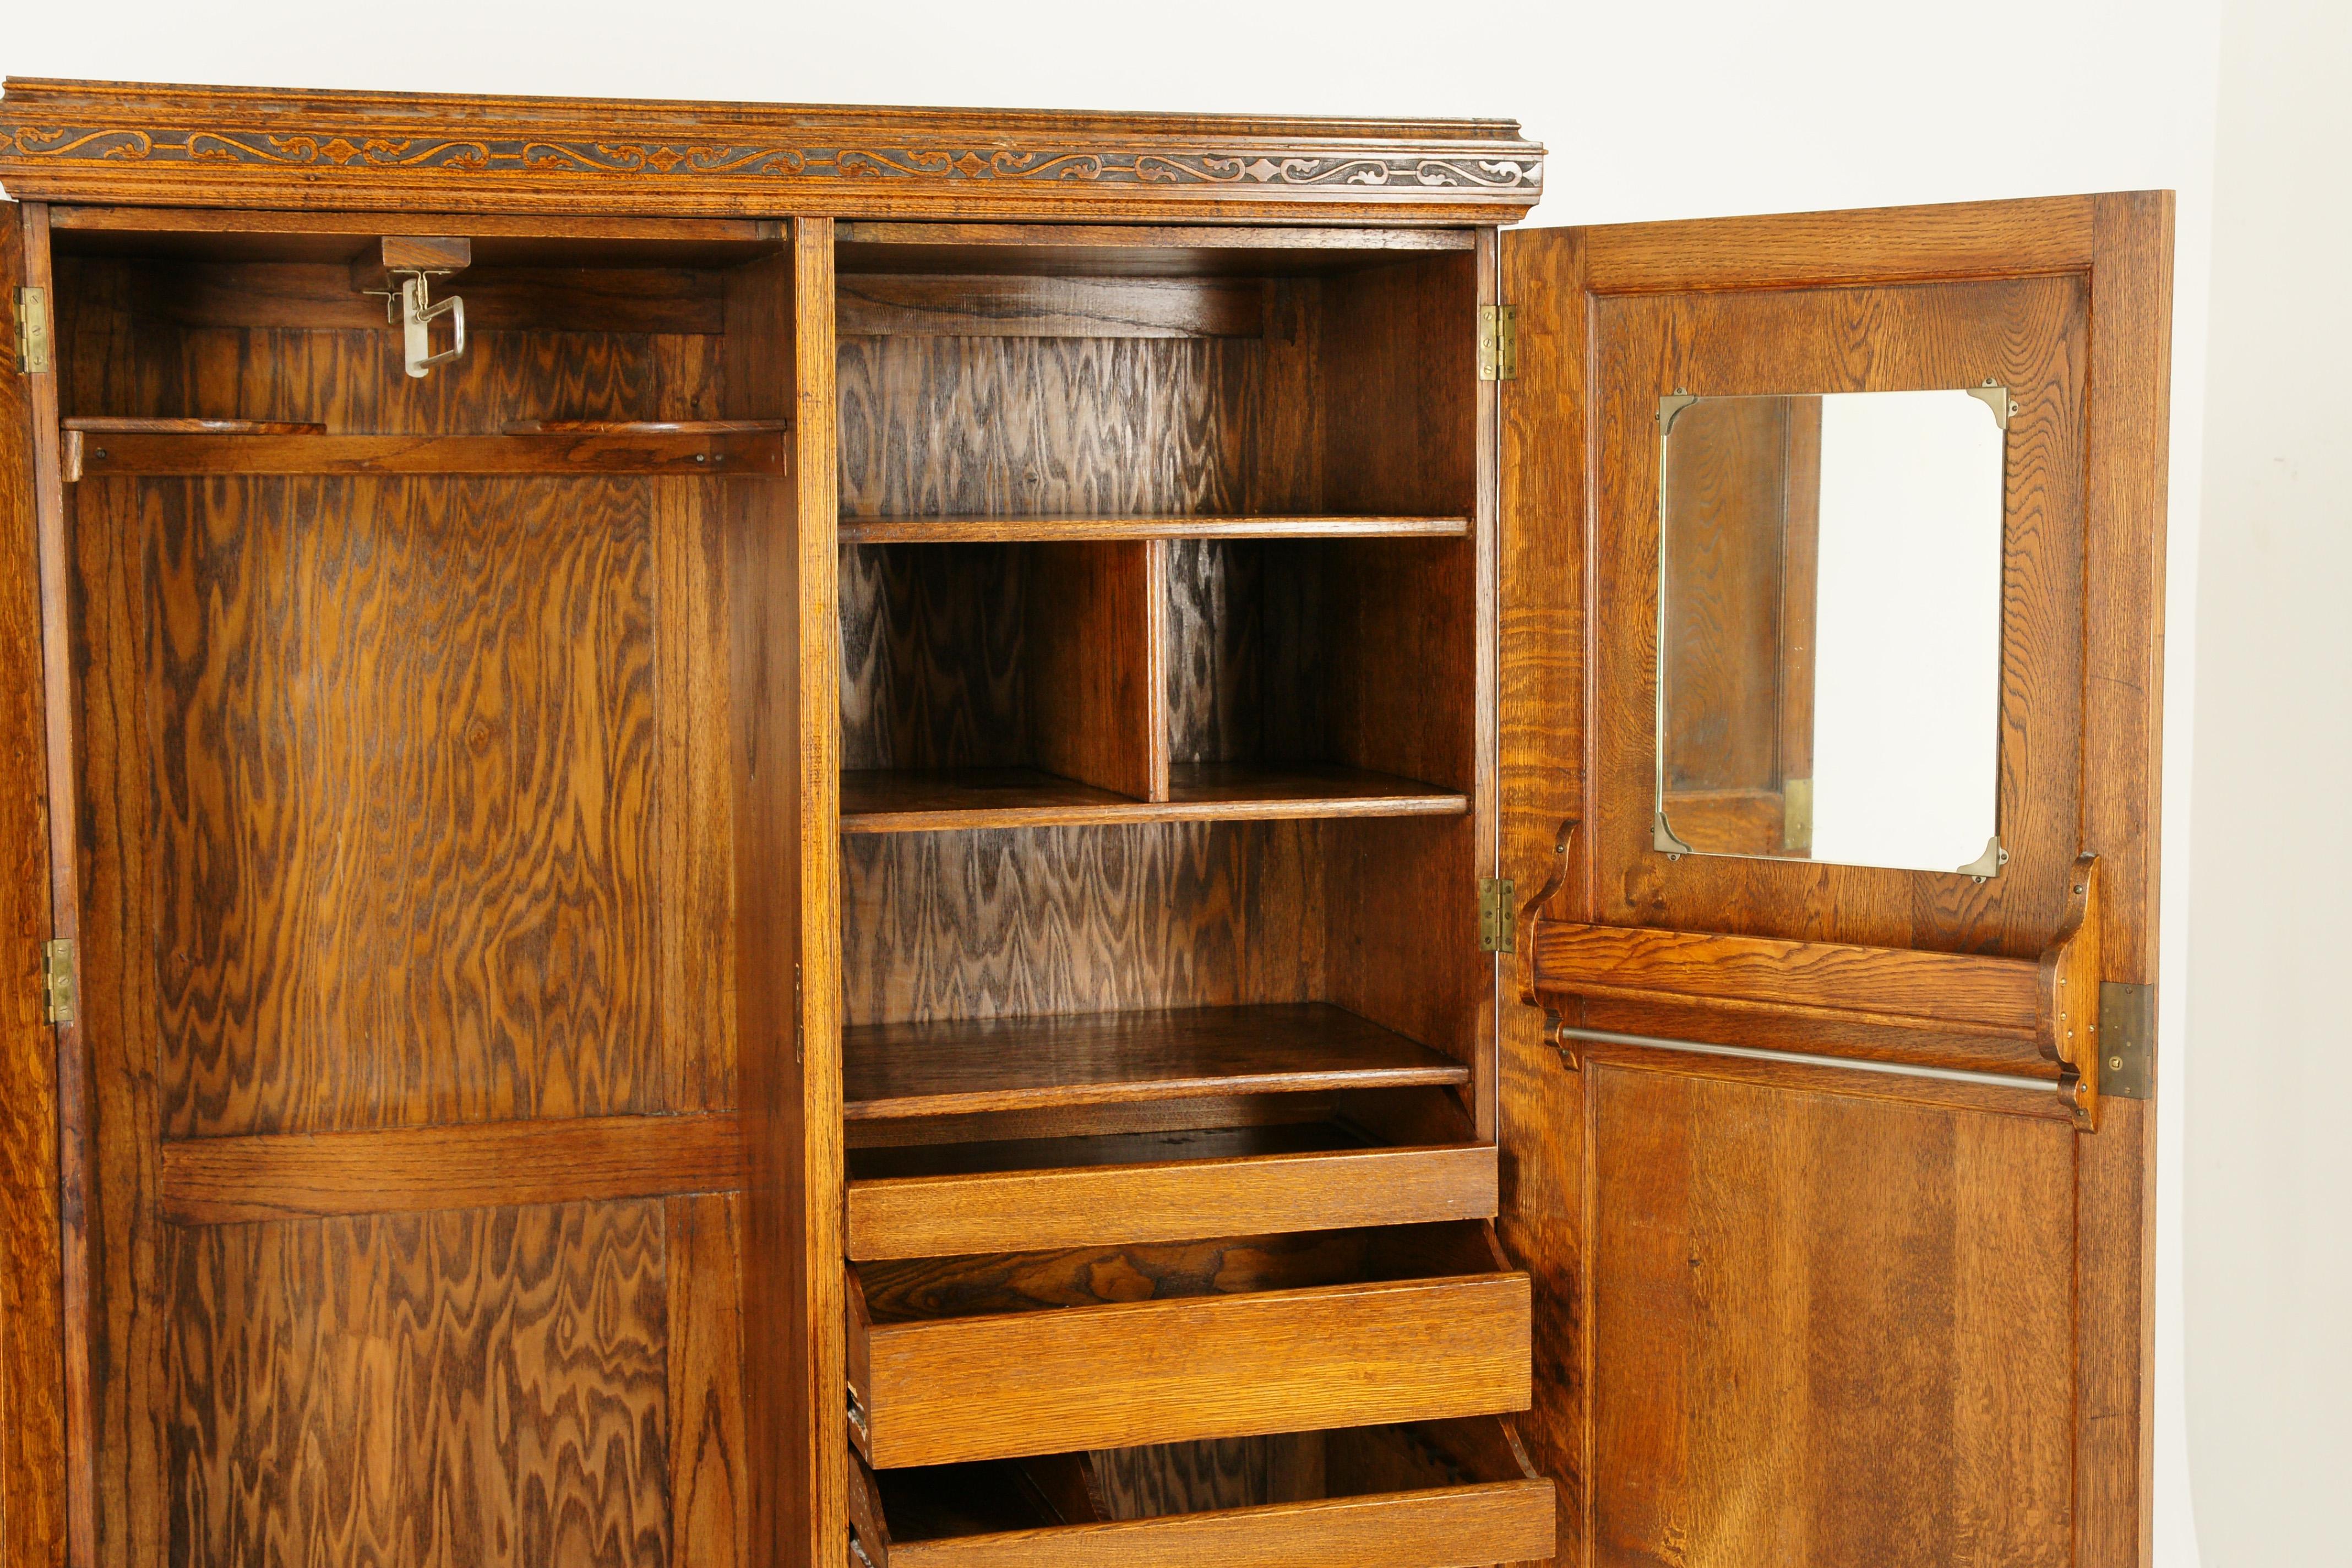 Antique wardrobe, antique armoire, tiger oak, oak Compactum, Scotland 1920, B1648

Scotland, 1920
solid tiger oak with original finish
carved cornice above
pair of carved paneled doors to the front
right door opens with cubby holes to the top
three